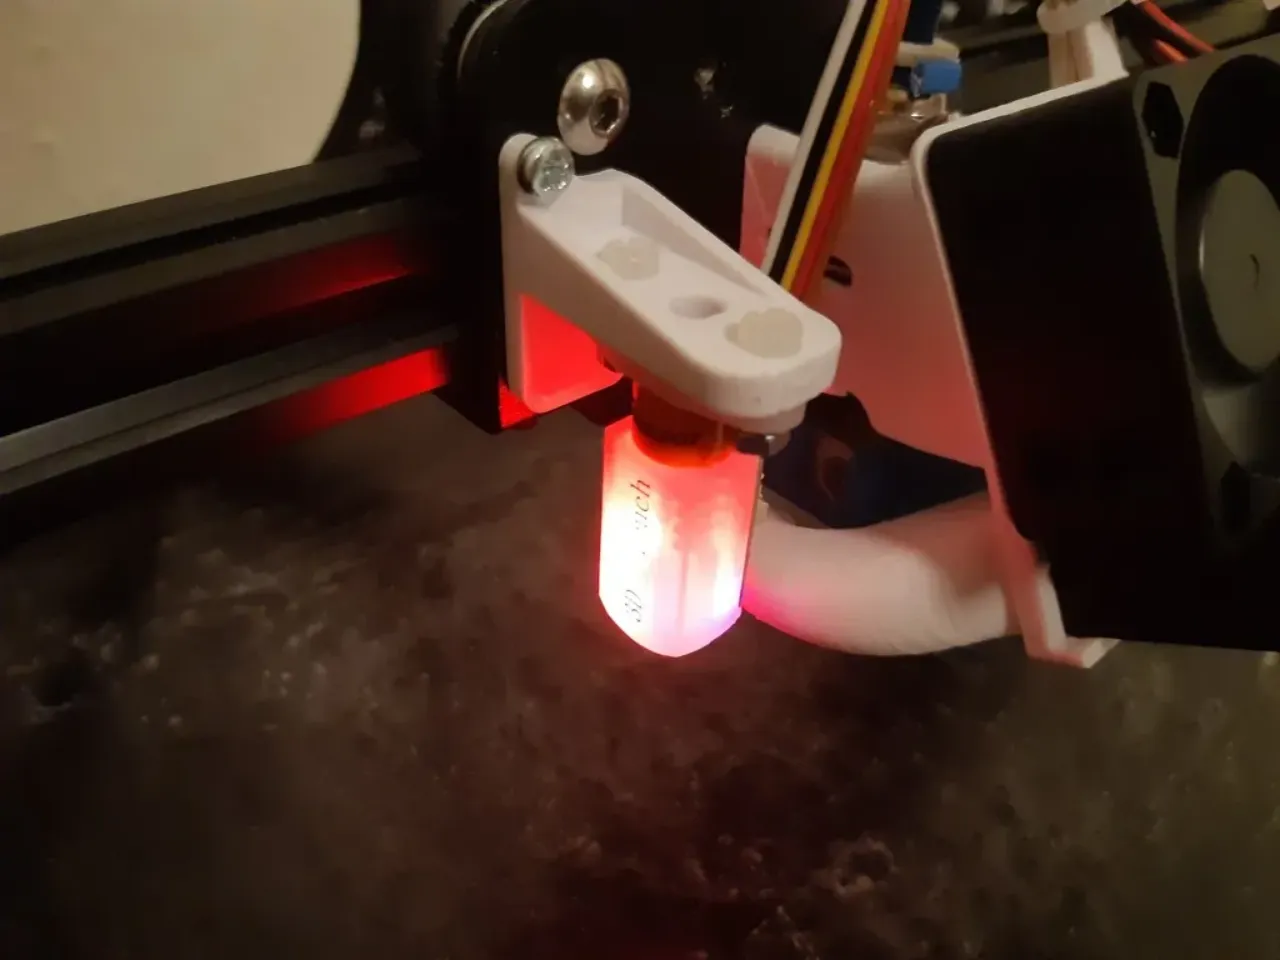 Ender 3 V2 3D Touch/BL Touch Mount by Consequences, Download free STL  model